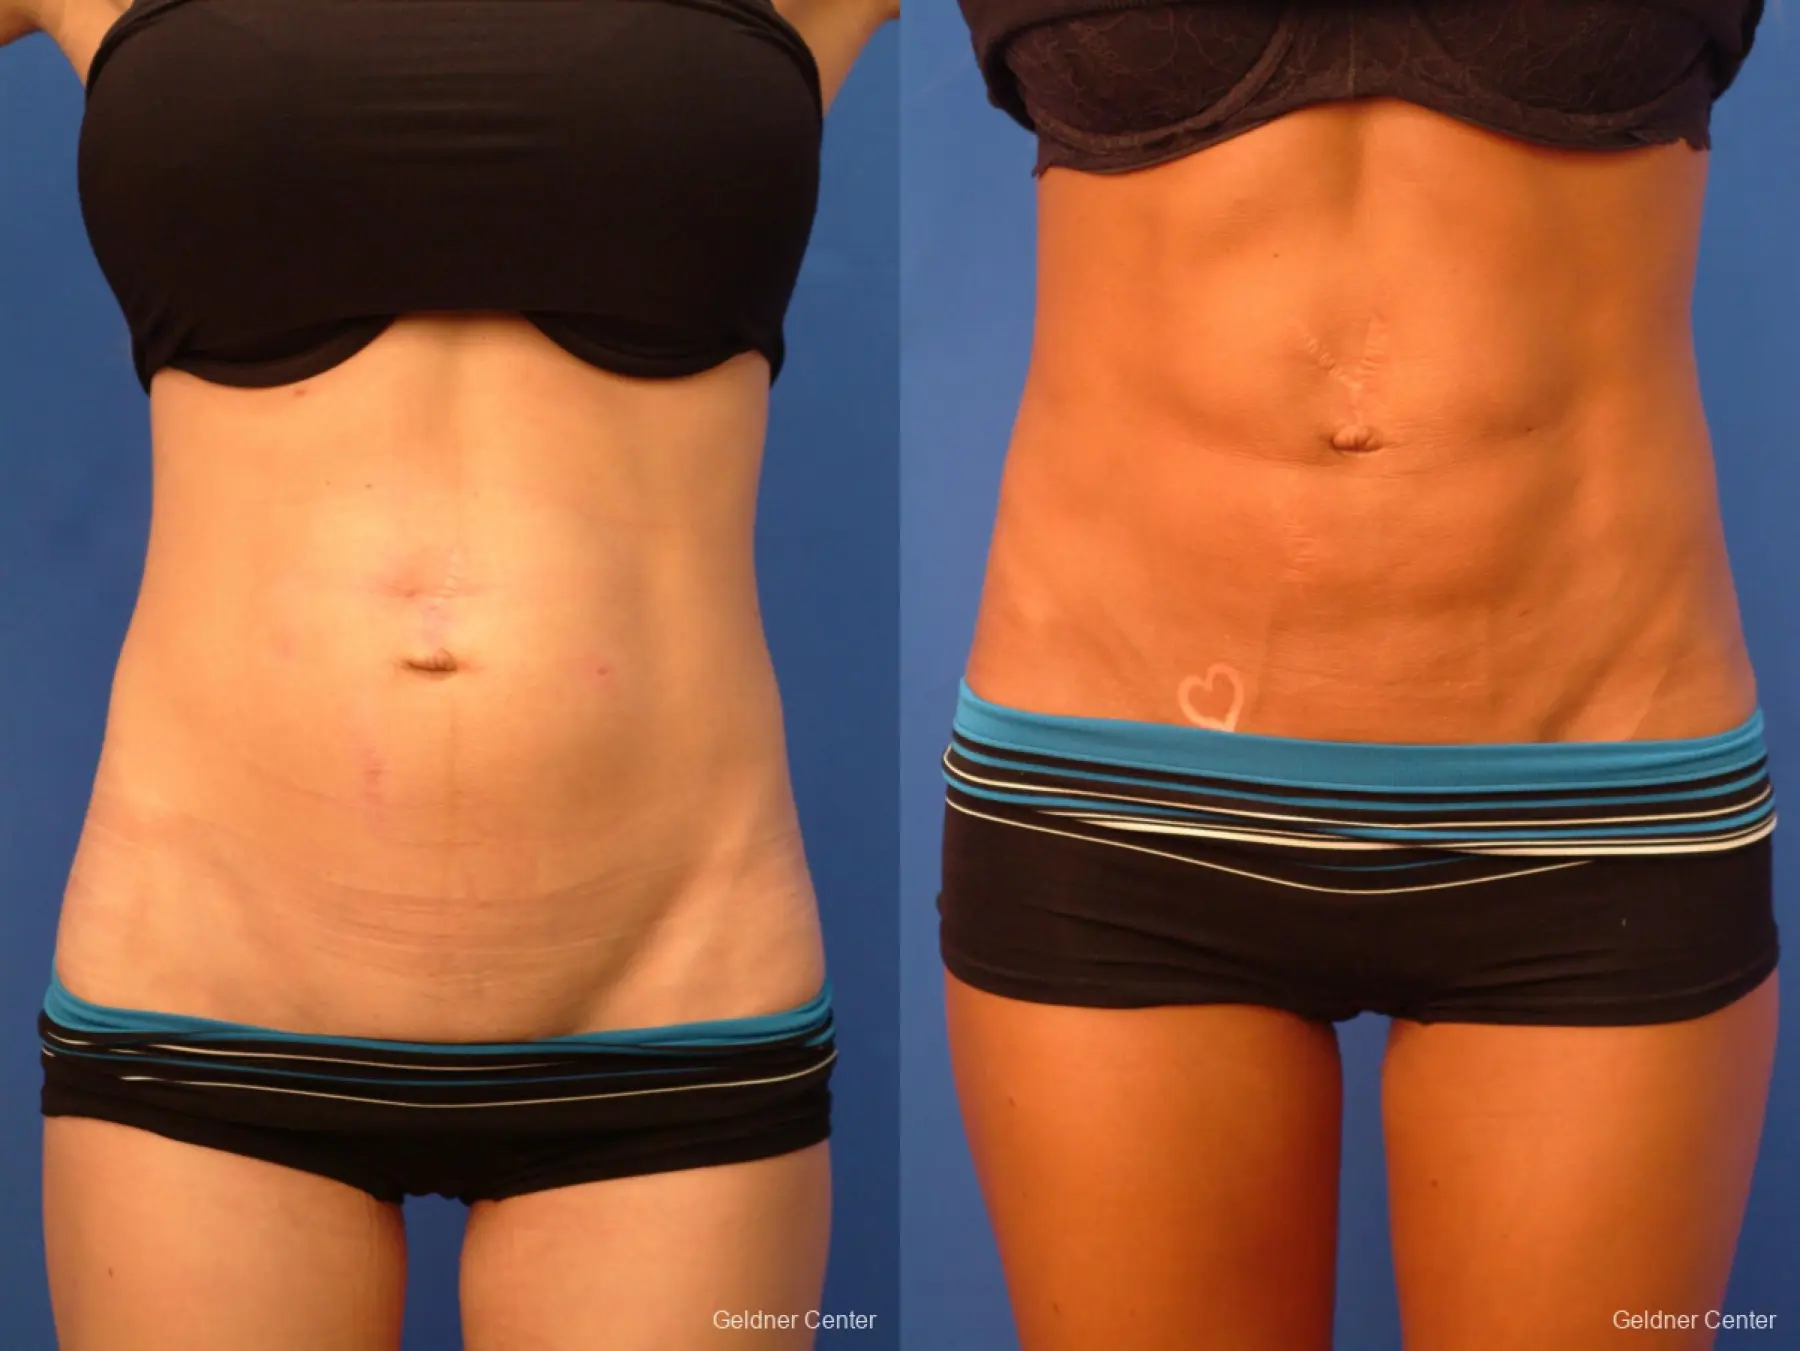  Vaser Liposuction with Abdominal Etching - Before and After 1